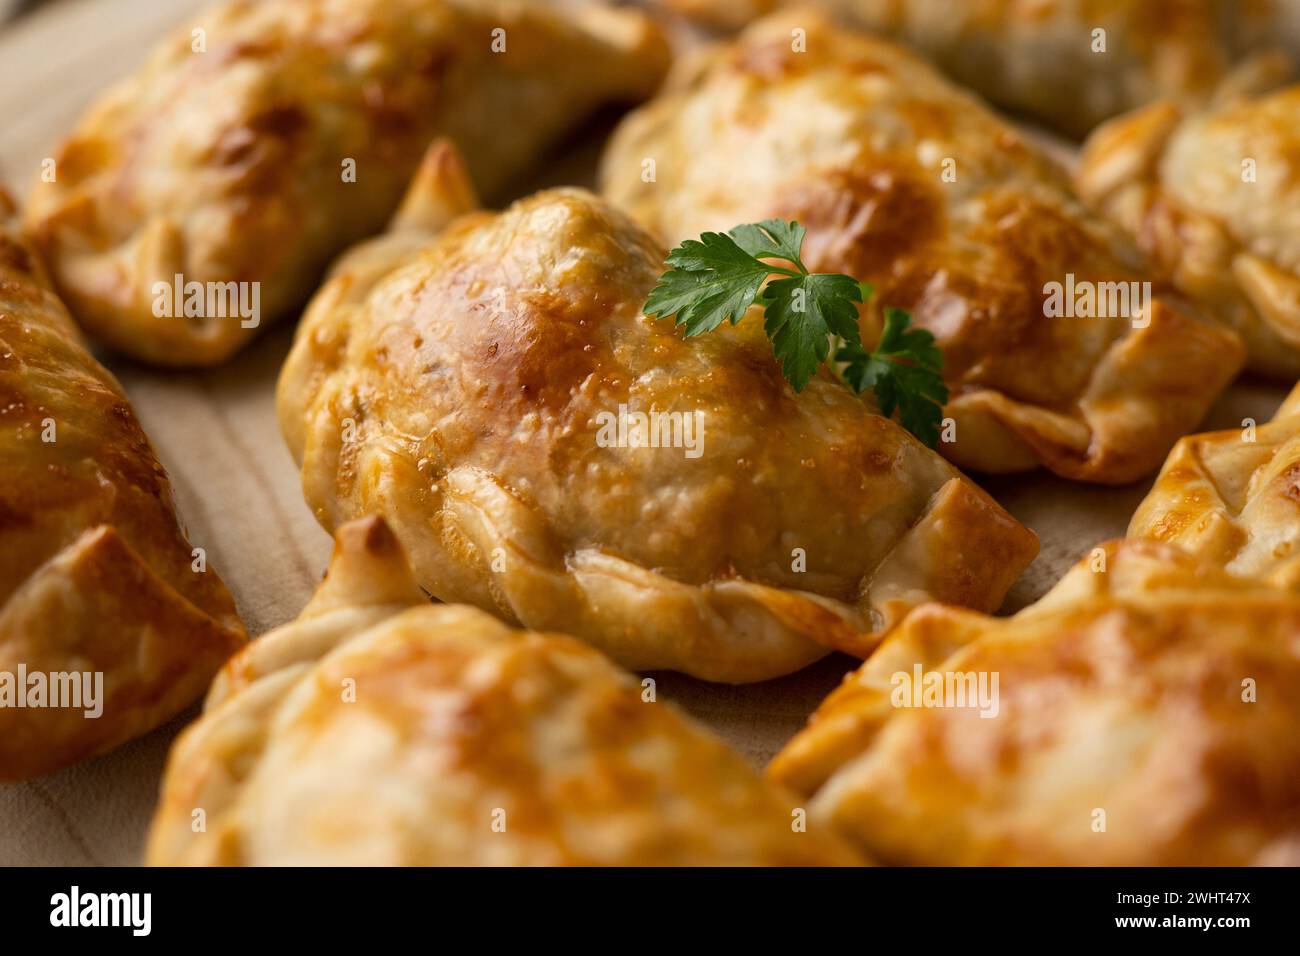 Baking delicious Argentine empanadas with chicken and vegetables. Stock Photo